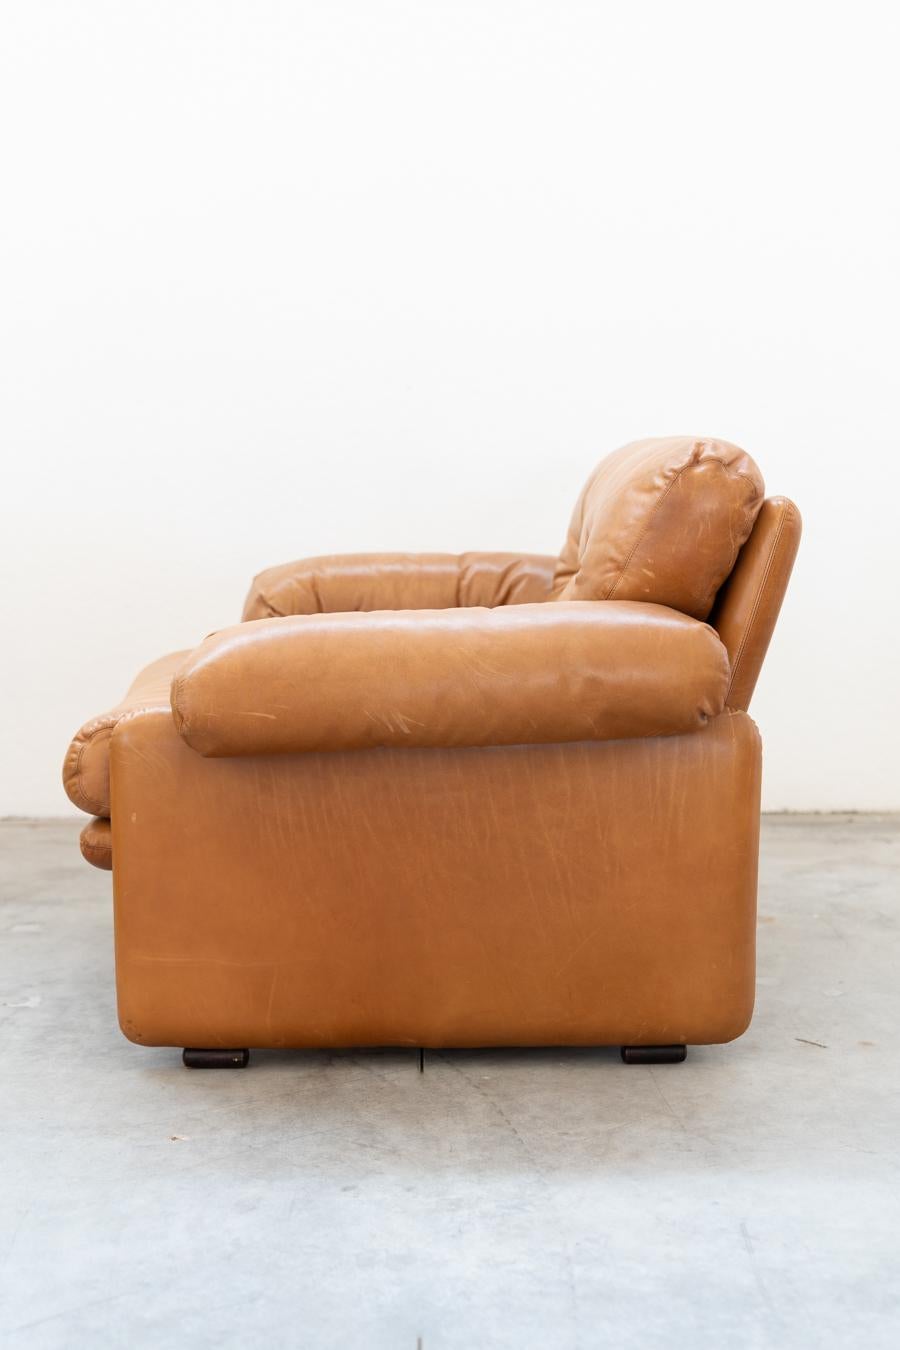 Pair of armchairs with pouf in cognac color model 